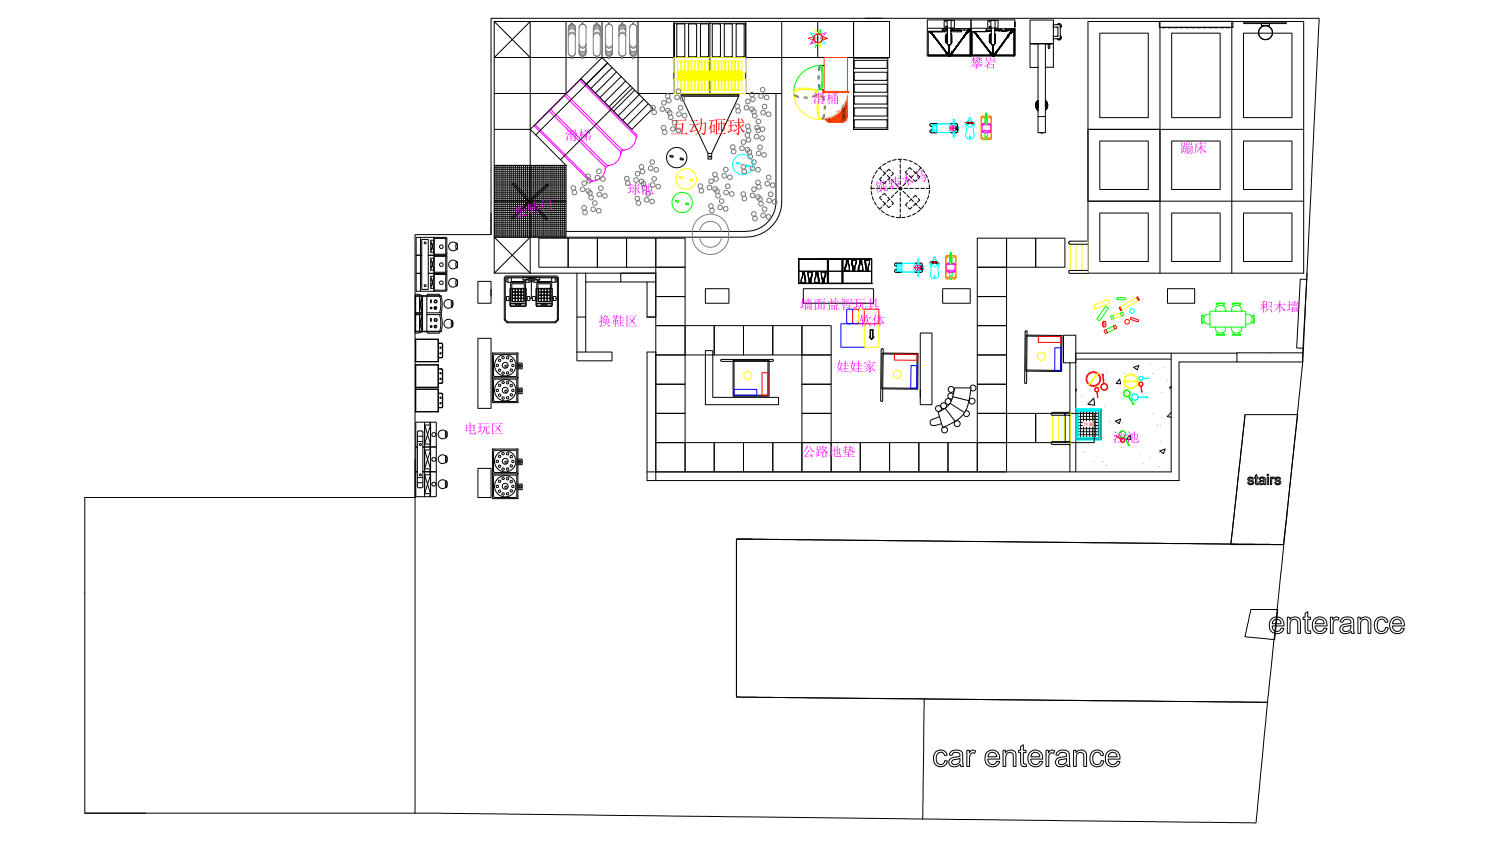 Analysis of Indoor Playground Components and Optimal Establishment Timing